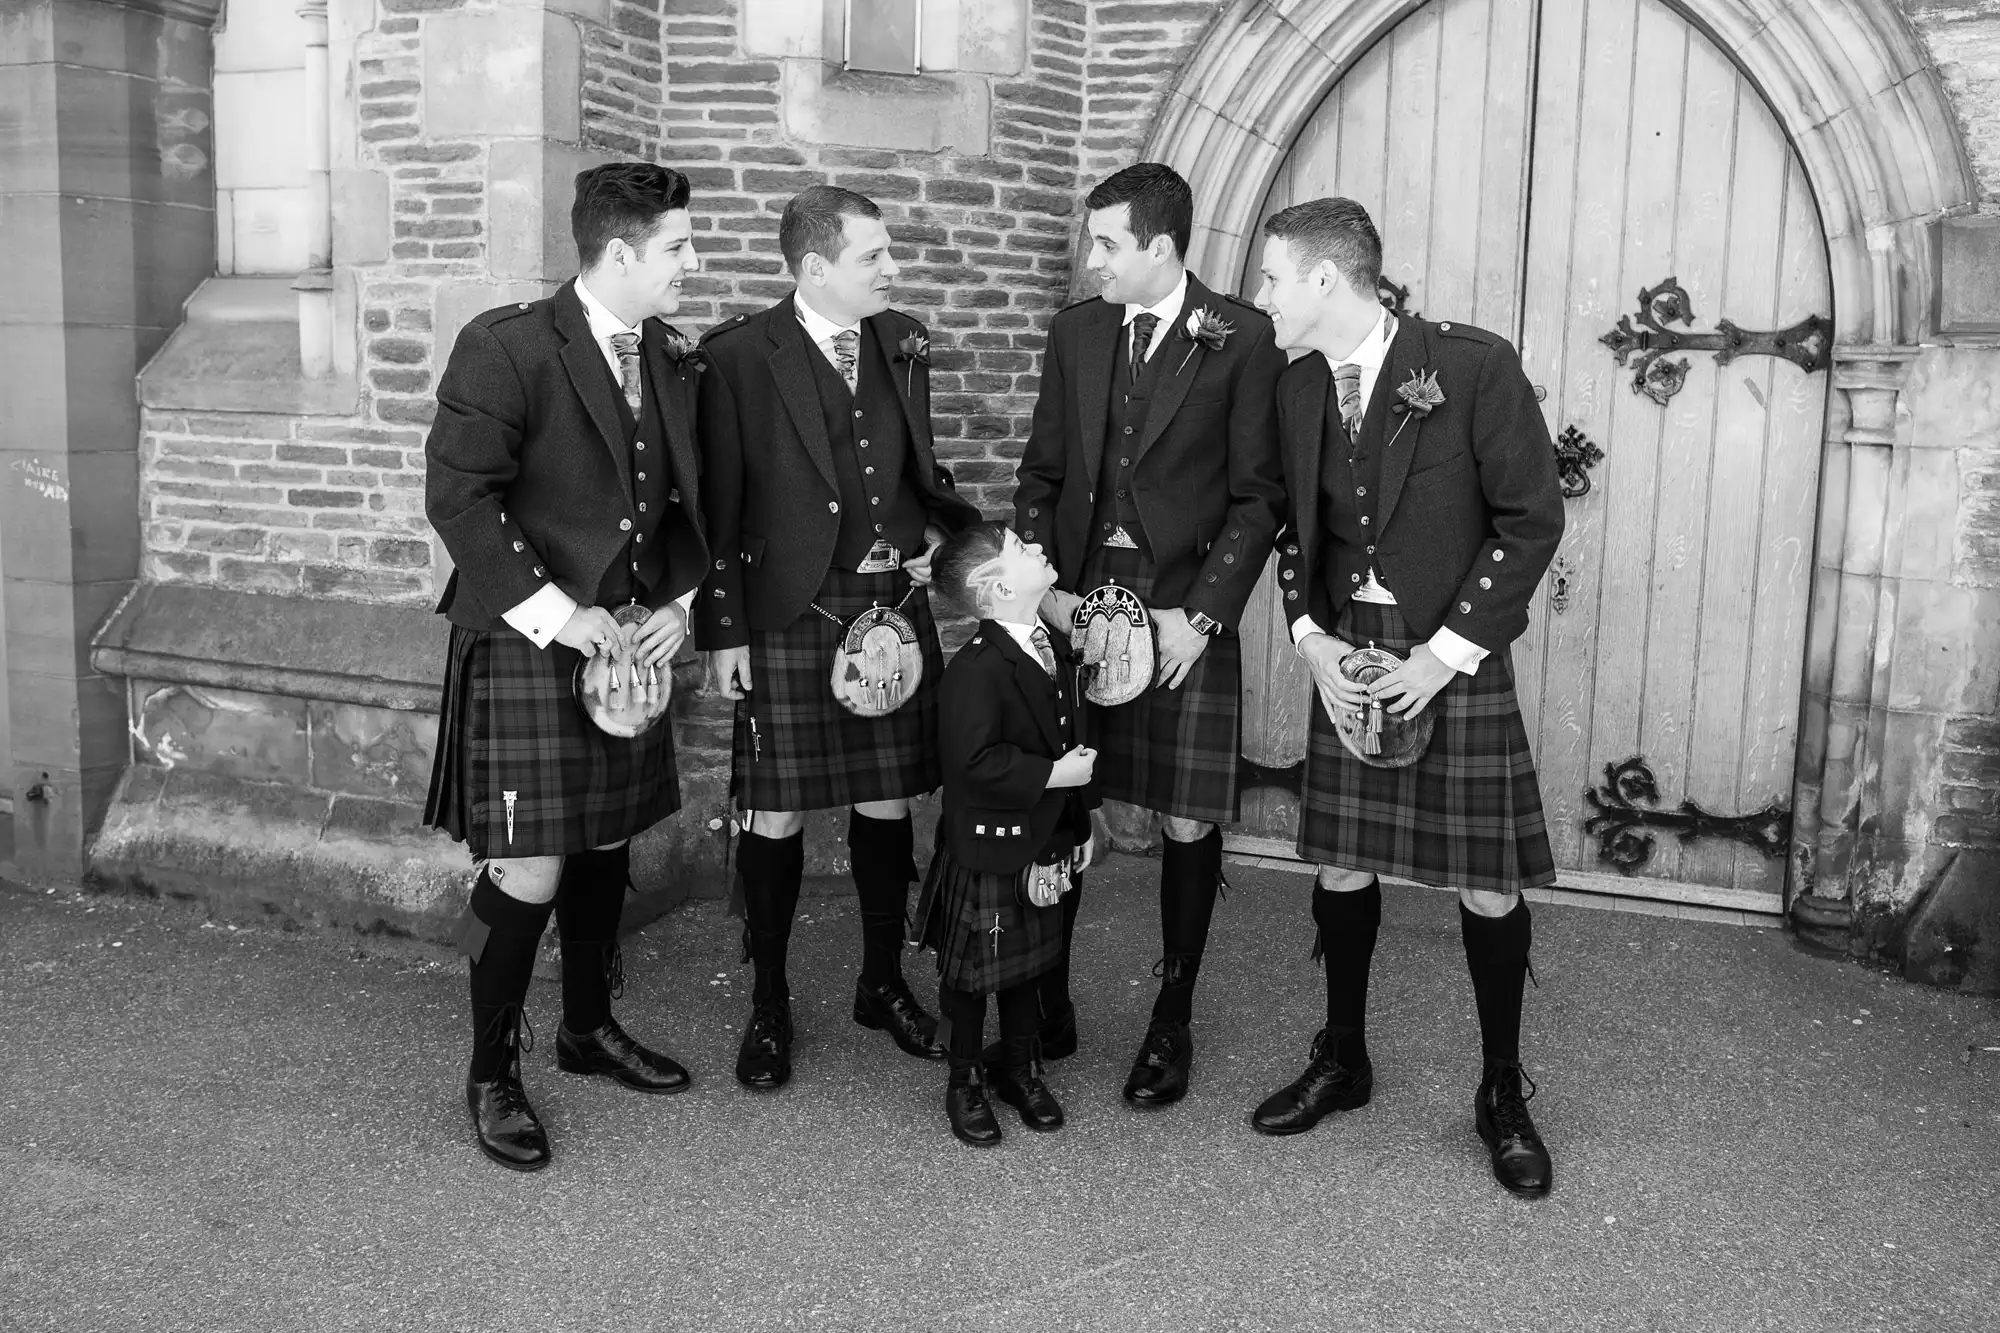 Four men in traditional scottish kilts and jackets gathered in conversation outside a historical stone building.